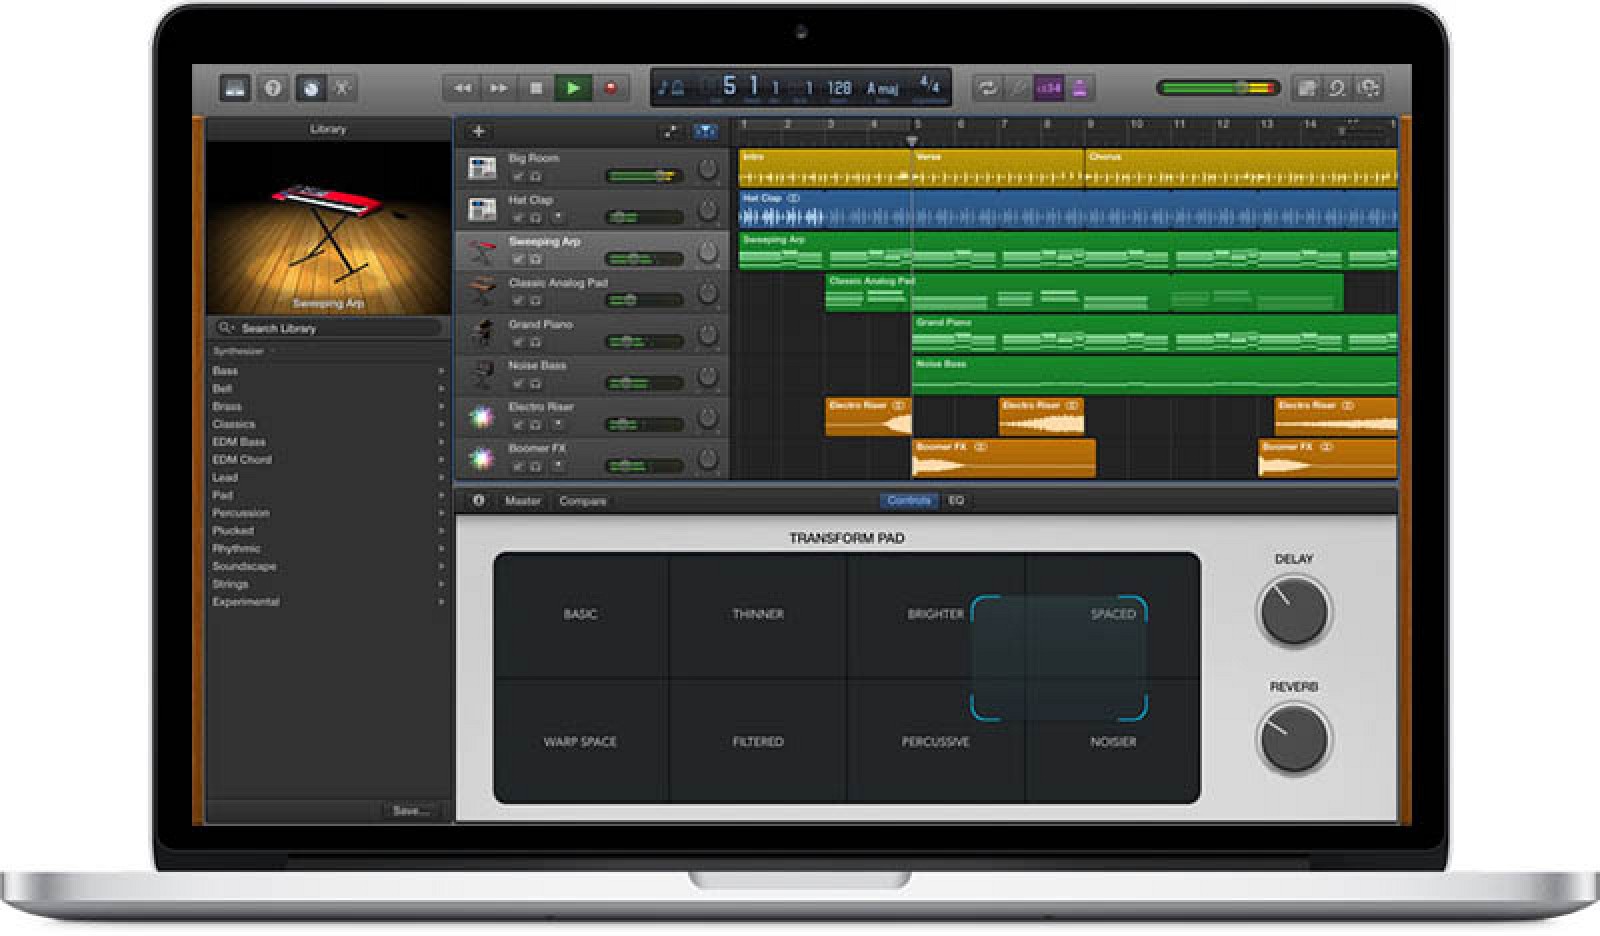 How To Connect Ipad To Garageband On Mac